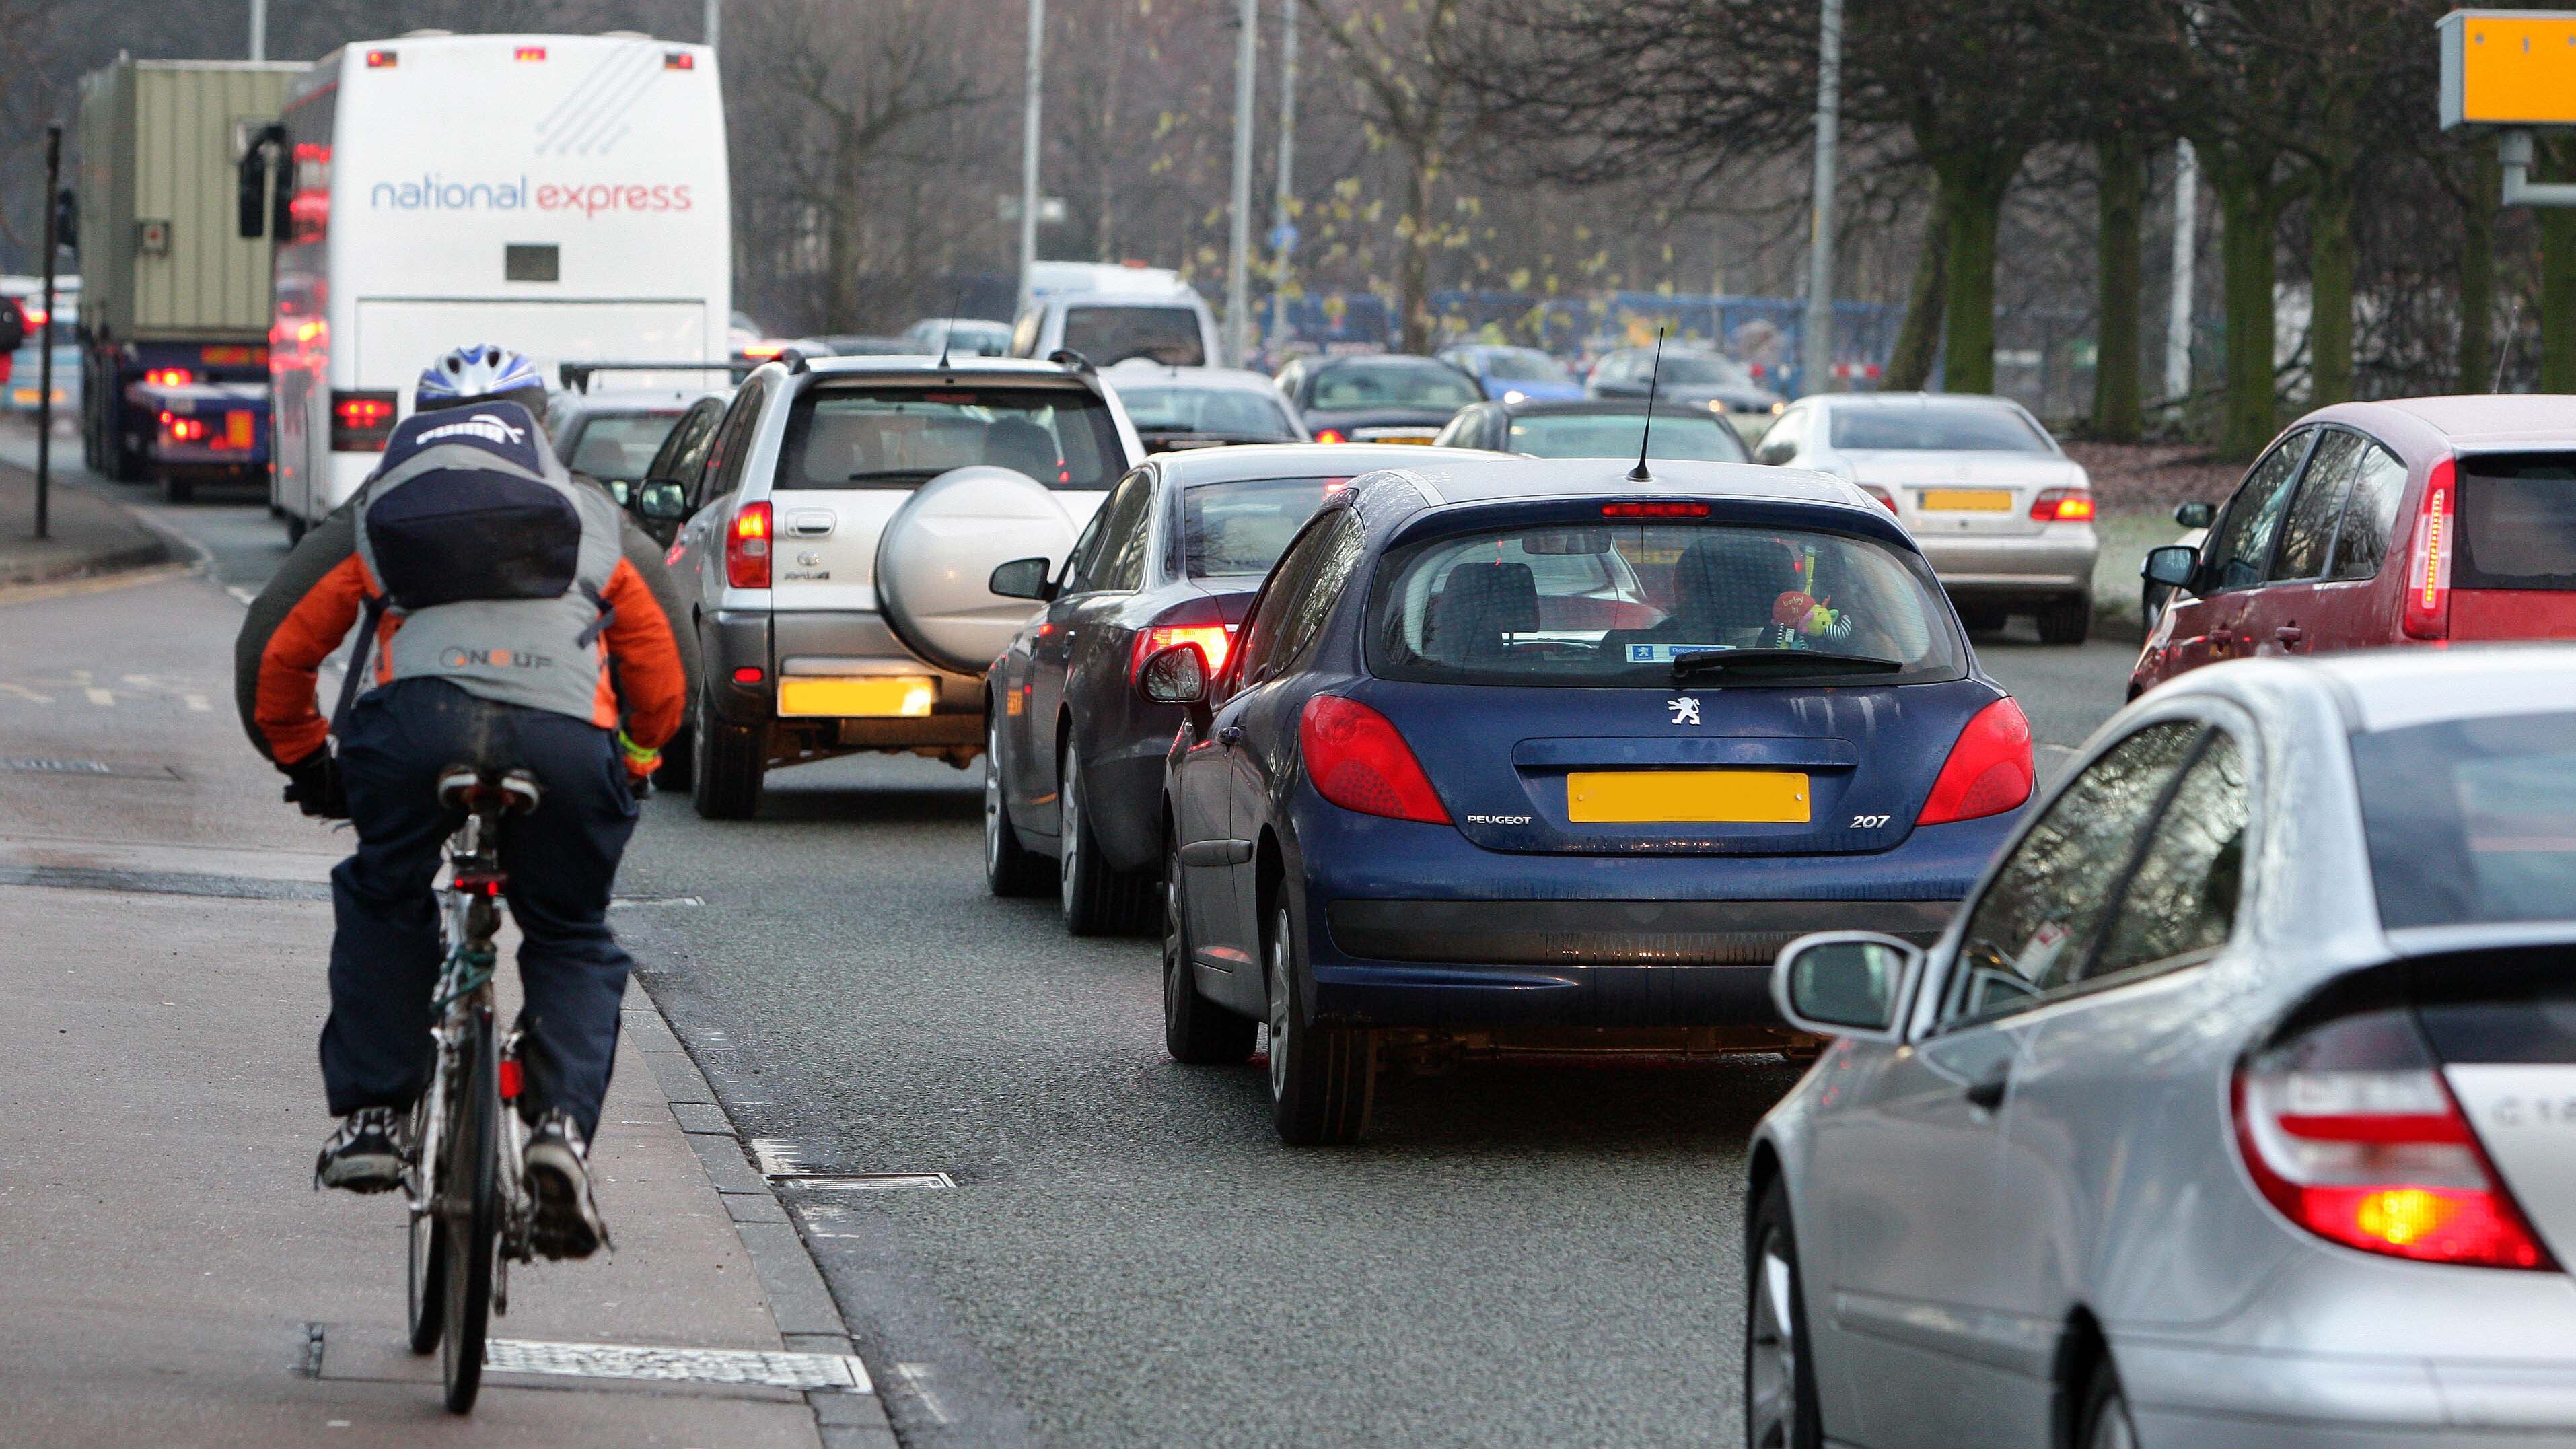 Traffic in Greater Manchester is a significant source of air pollution